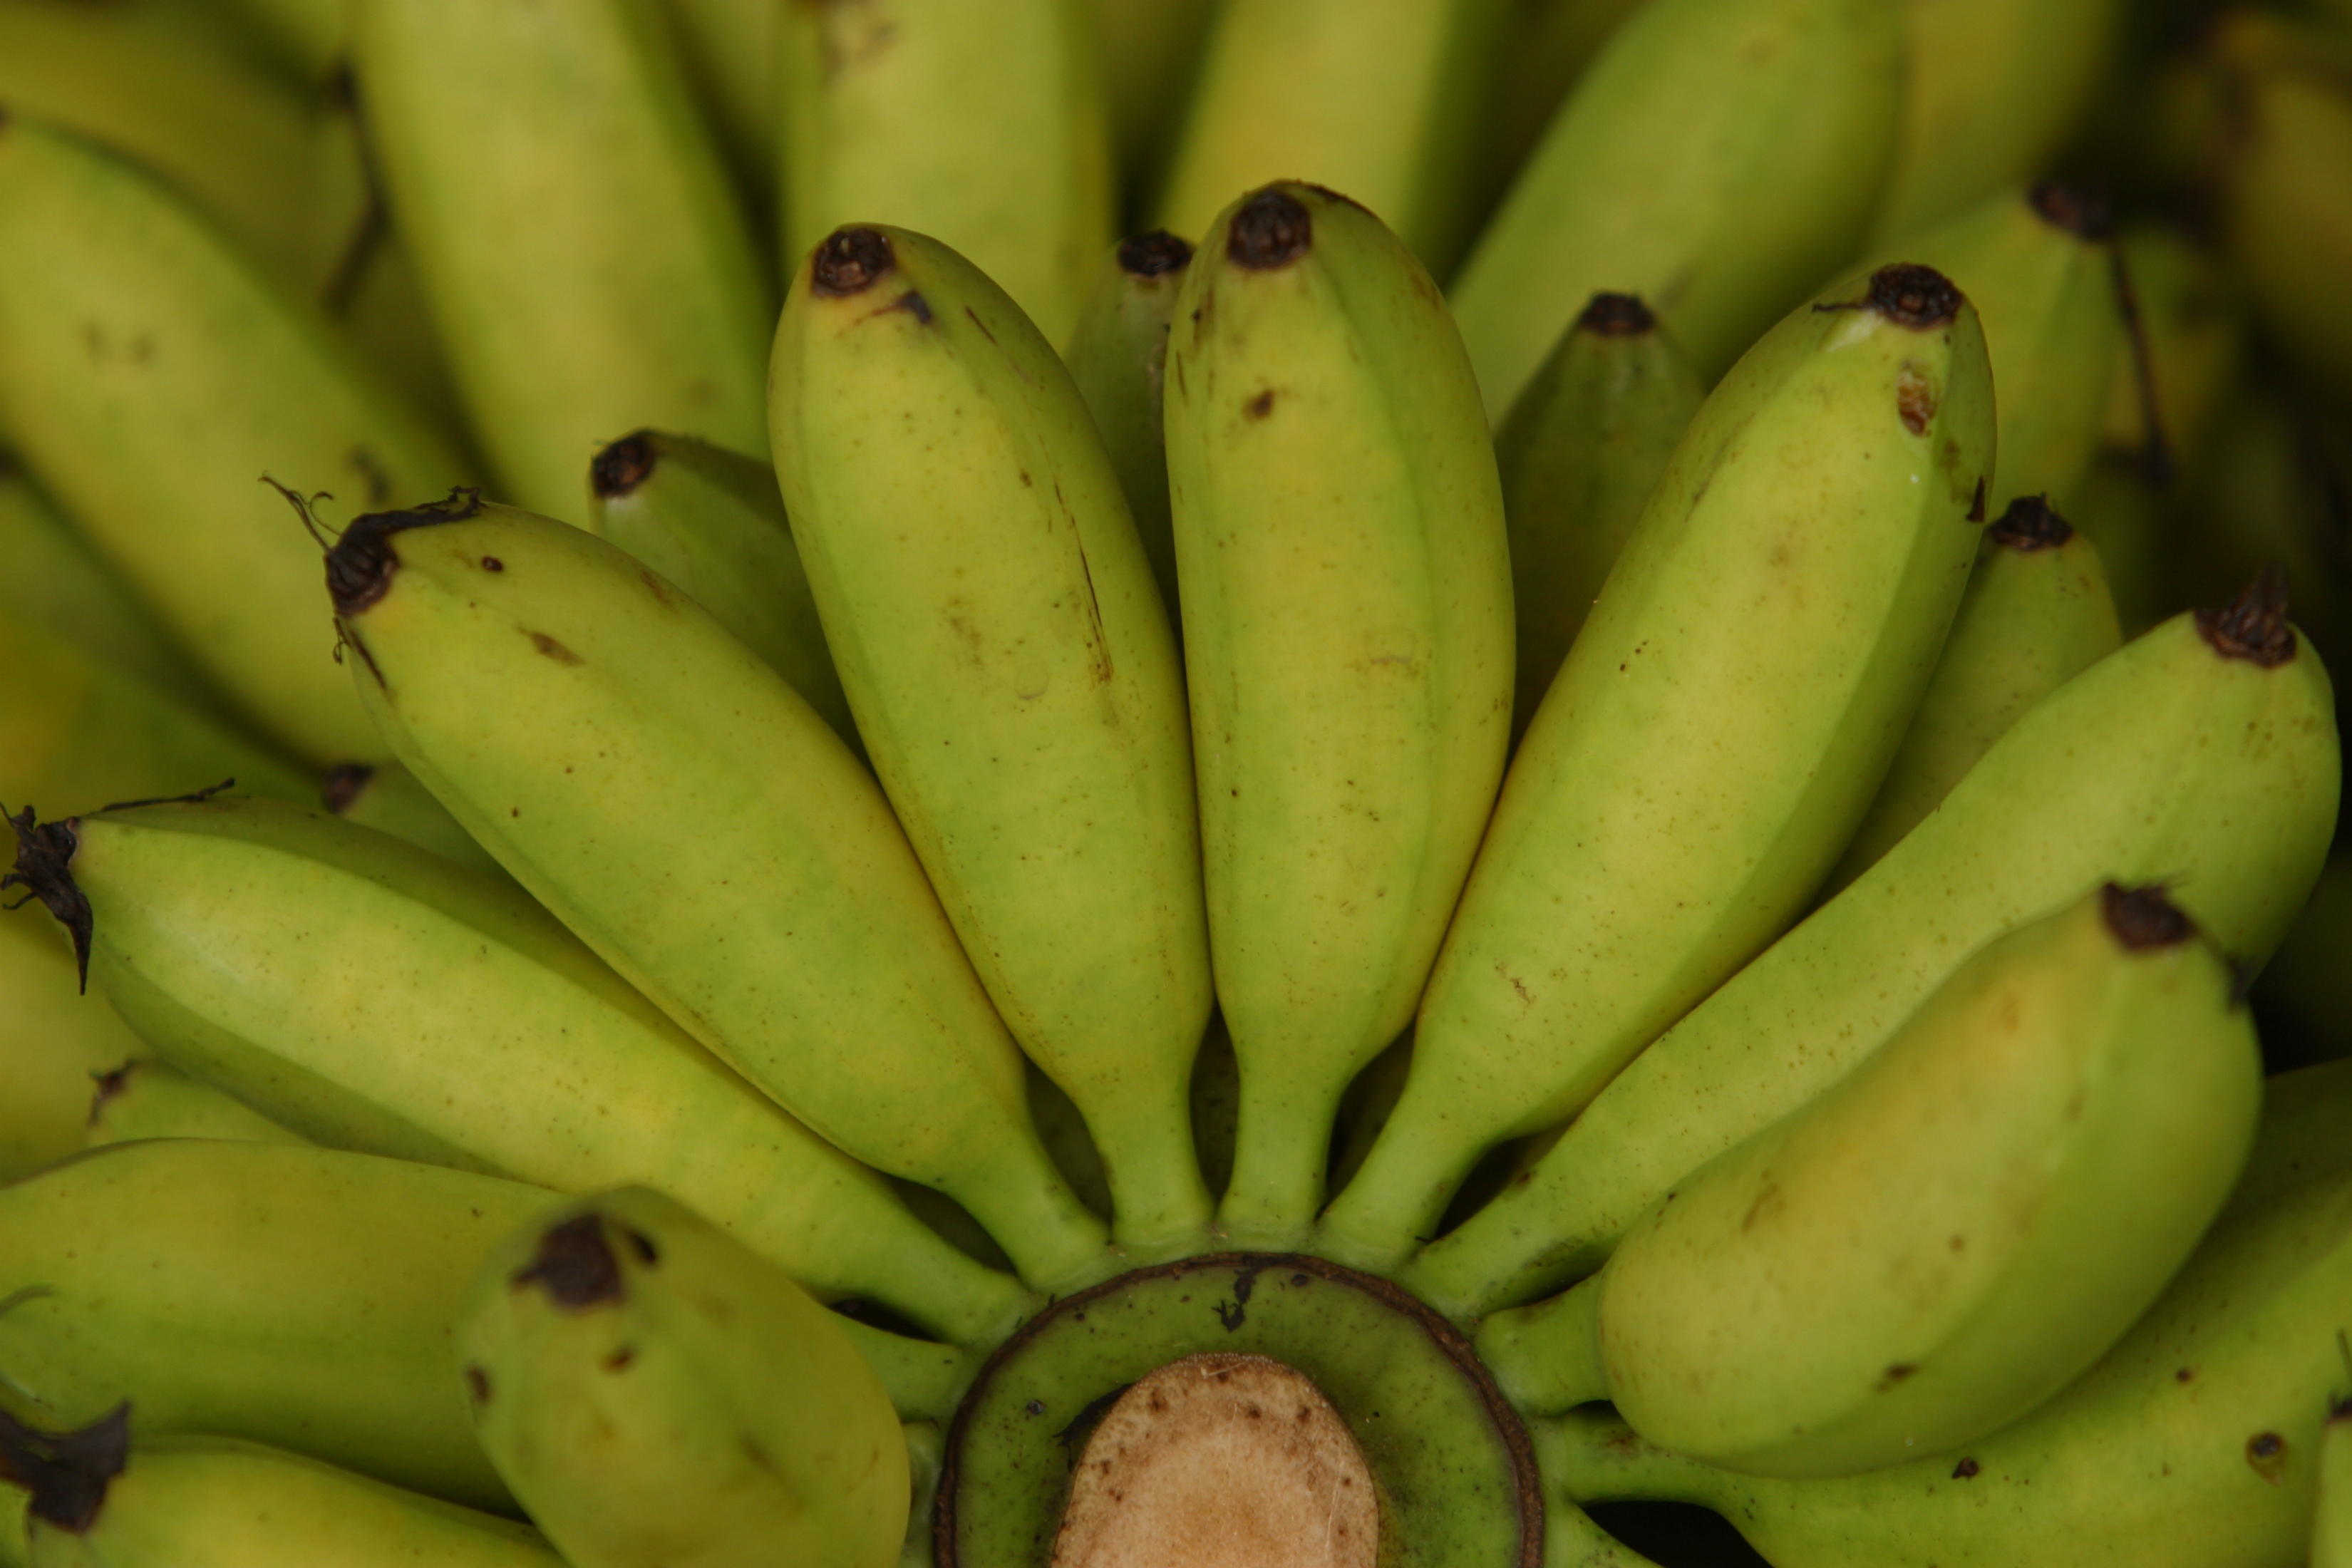 Are Green Bananas Better for You? | LIVESTRONG.COM